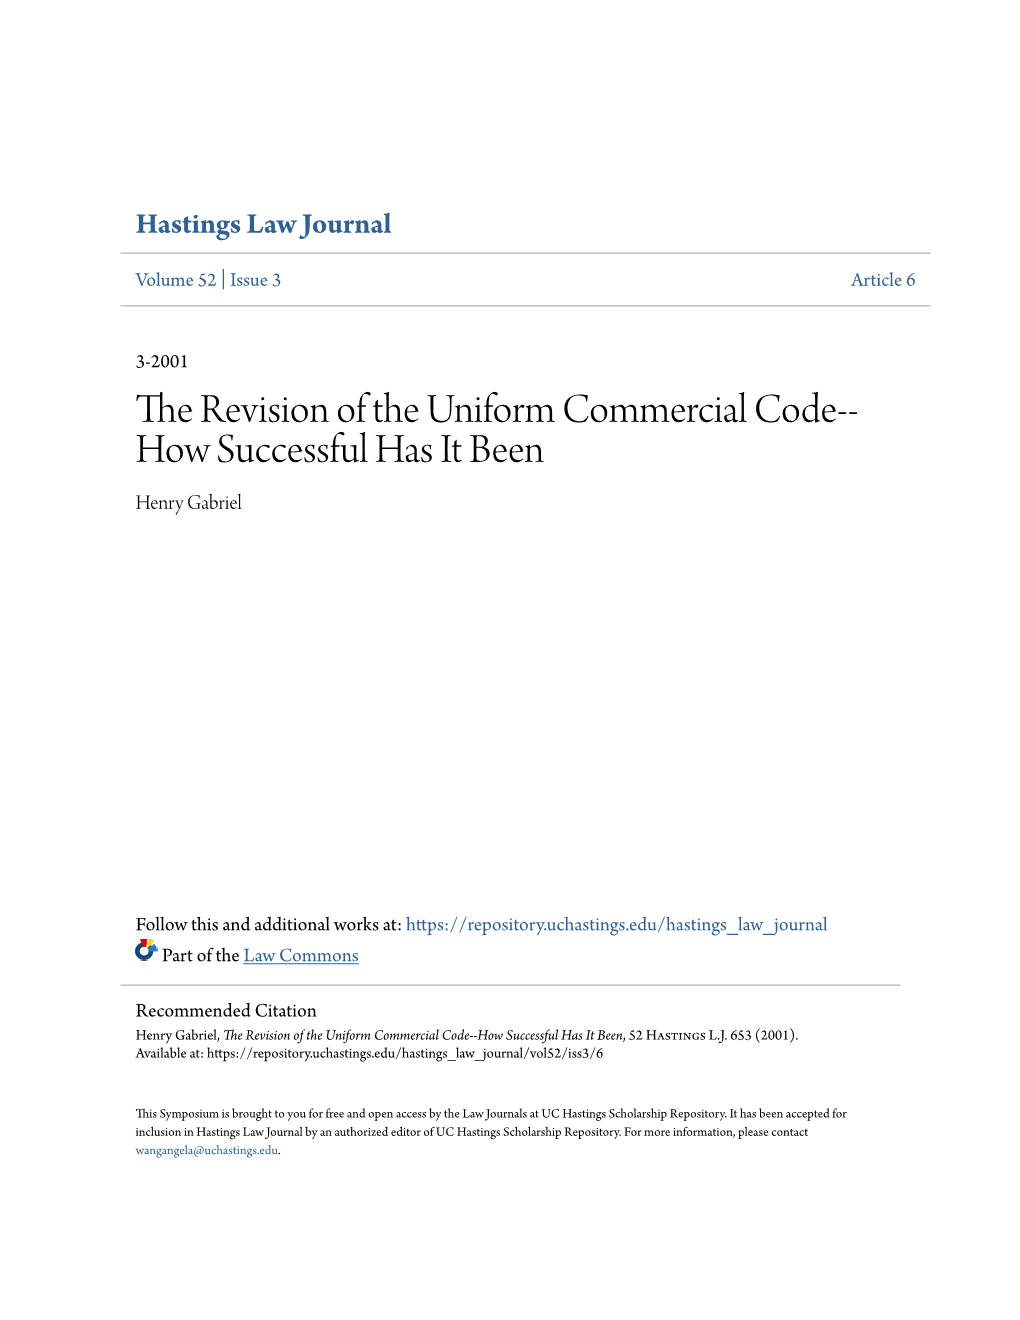 The Revision of the Uniform Commercial Code-- How Successful Has It Been Henry Gabriel